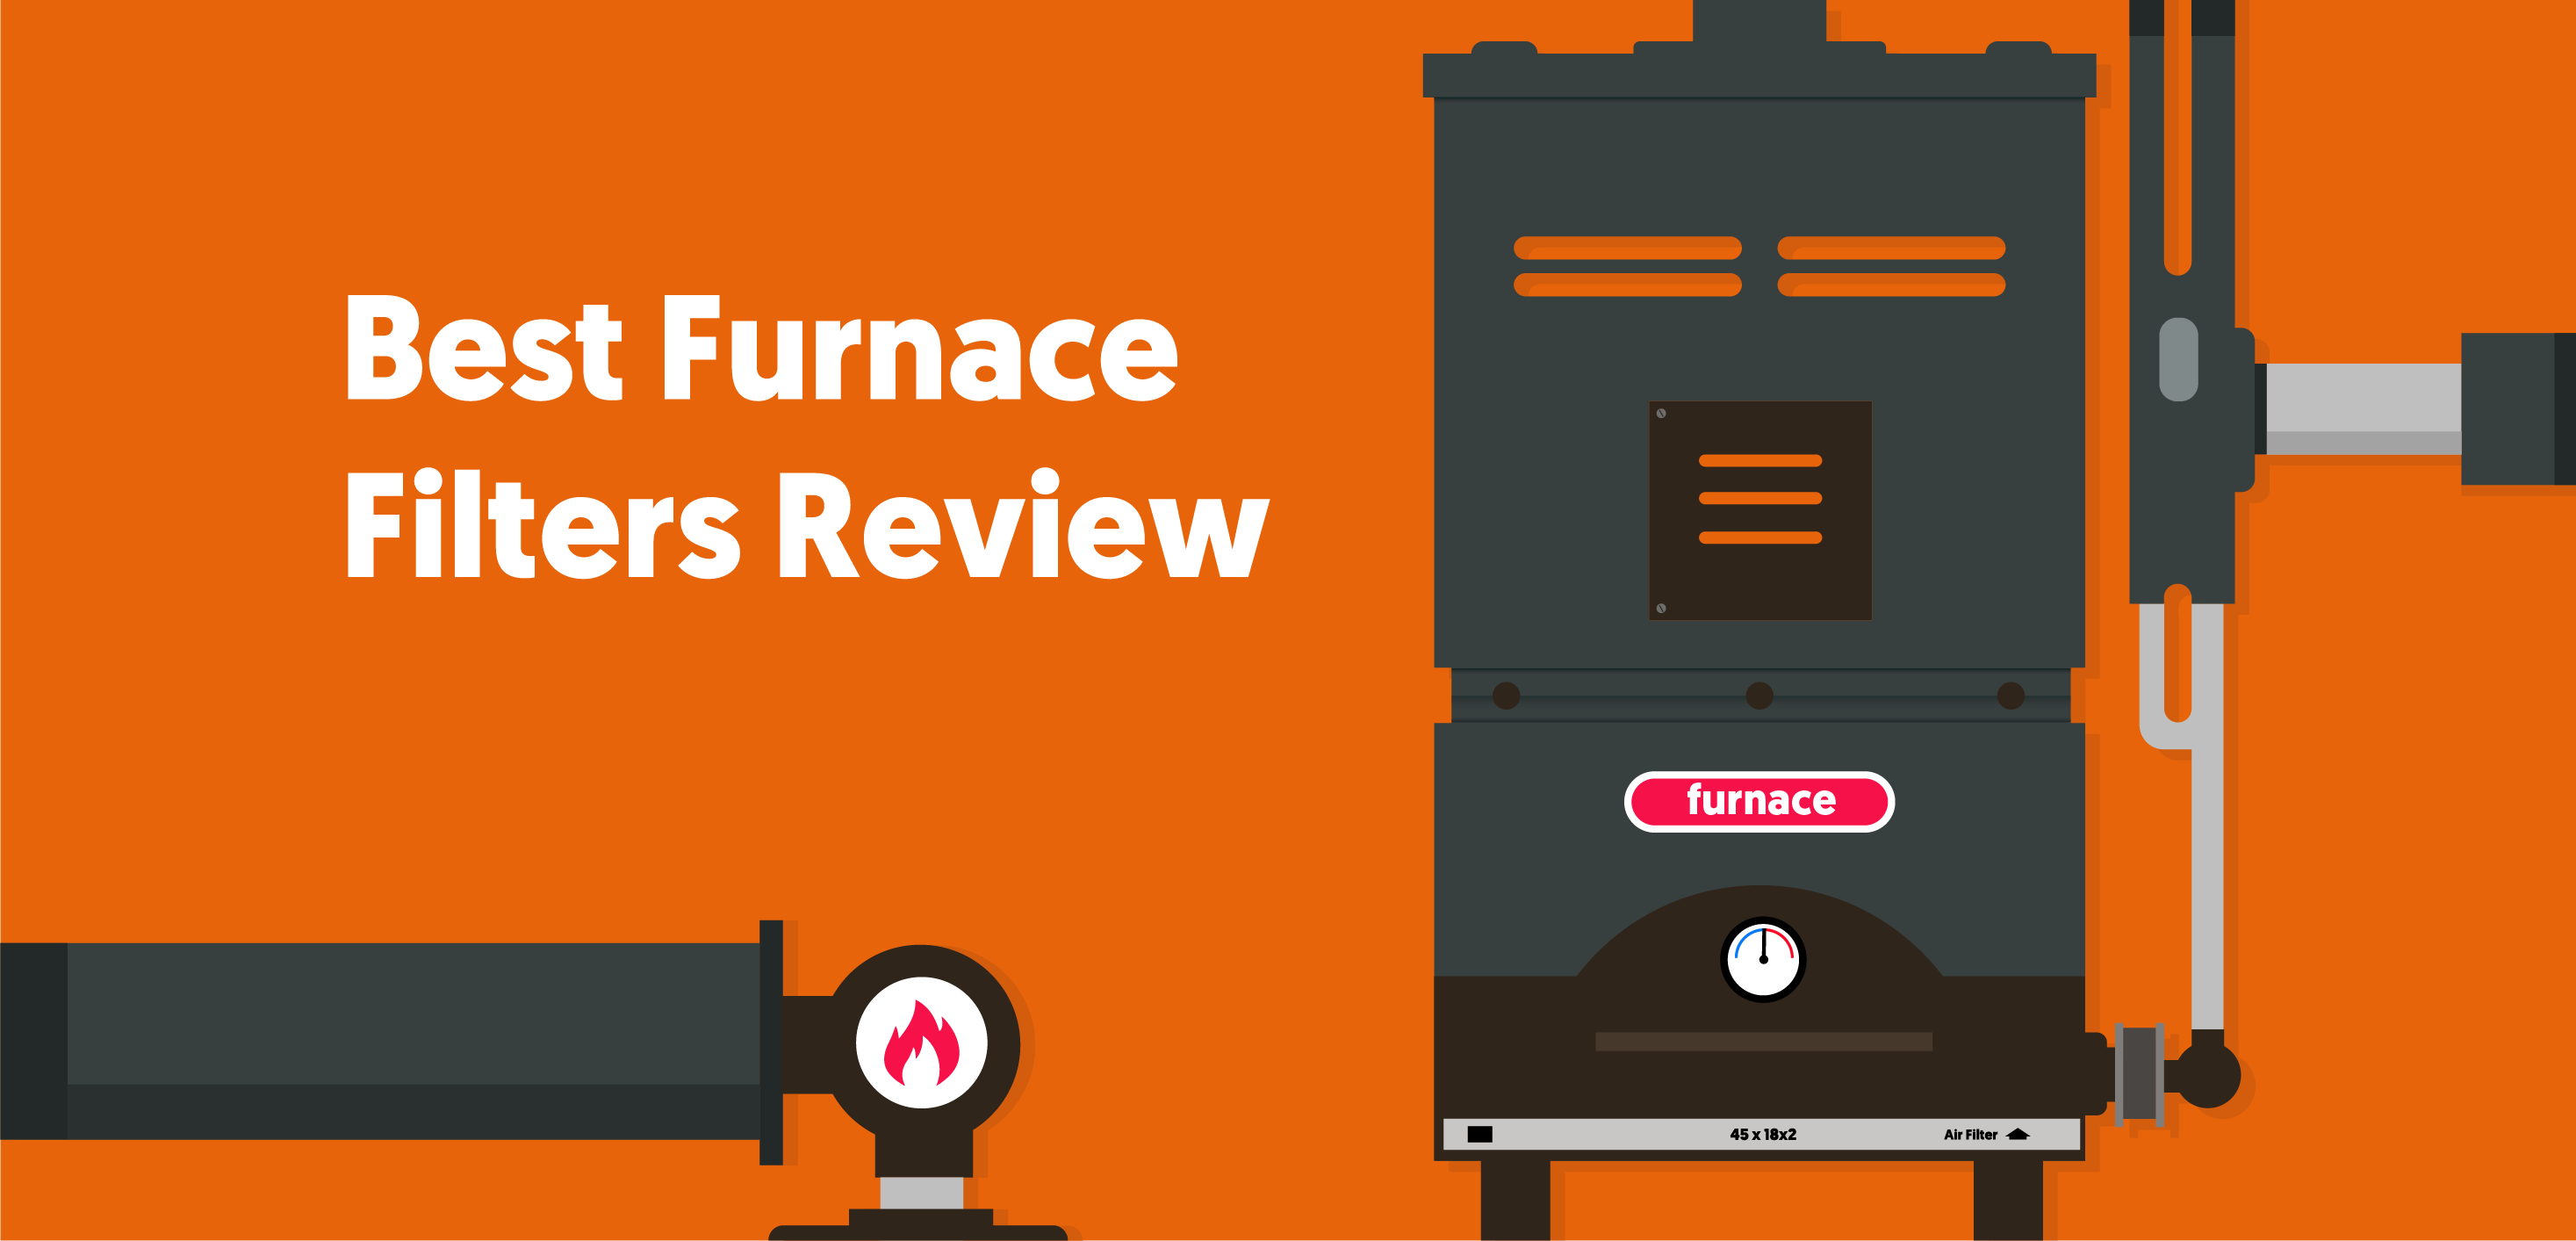 Best furnace filers review